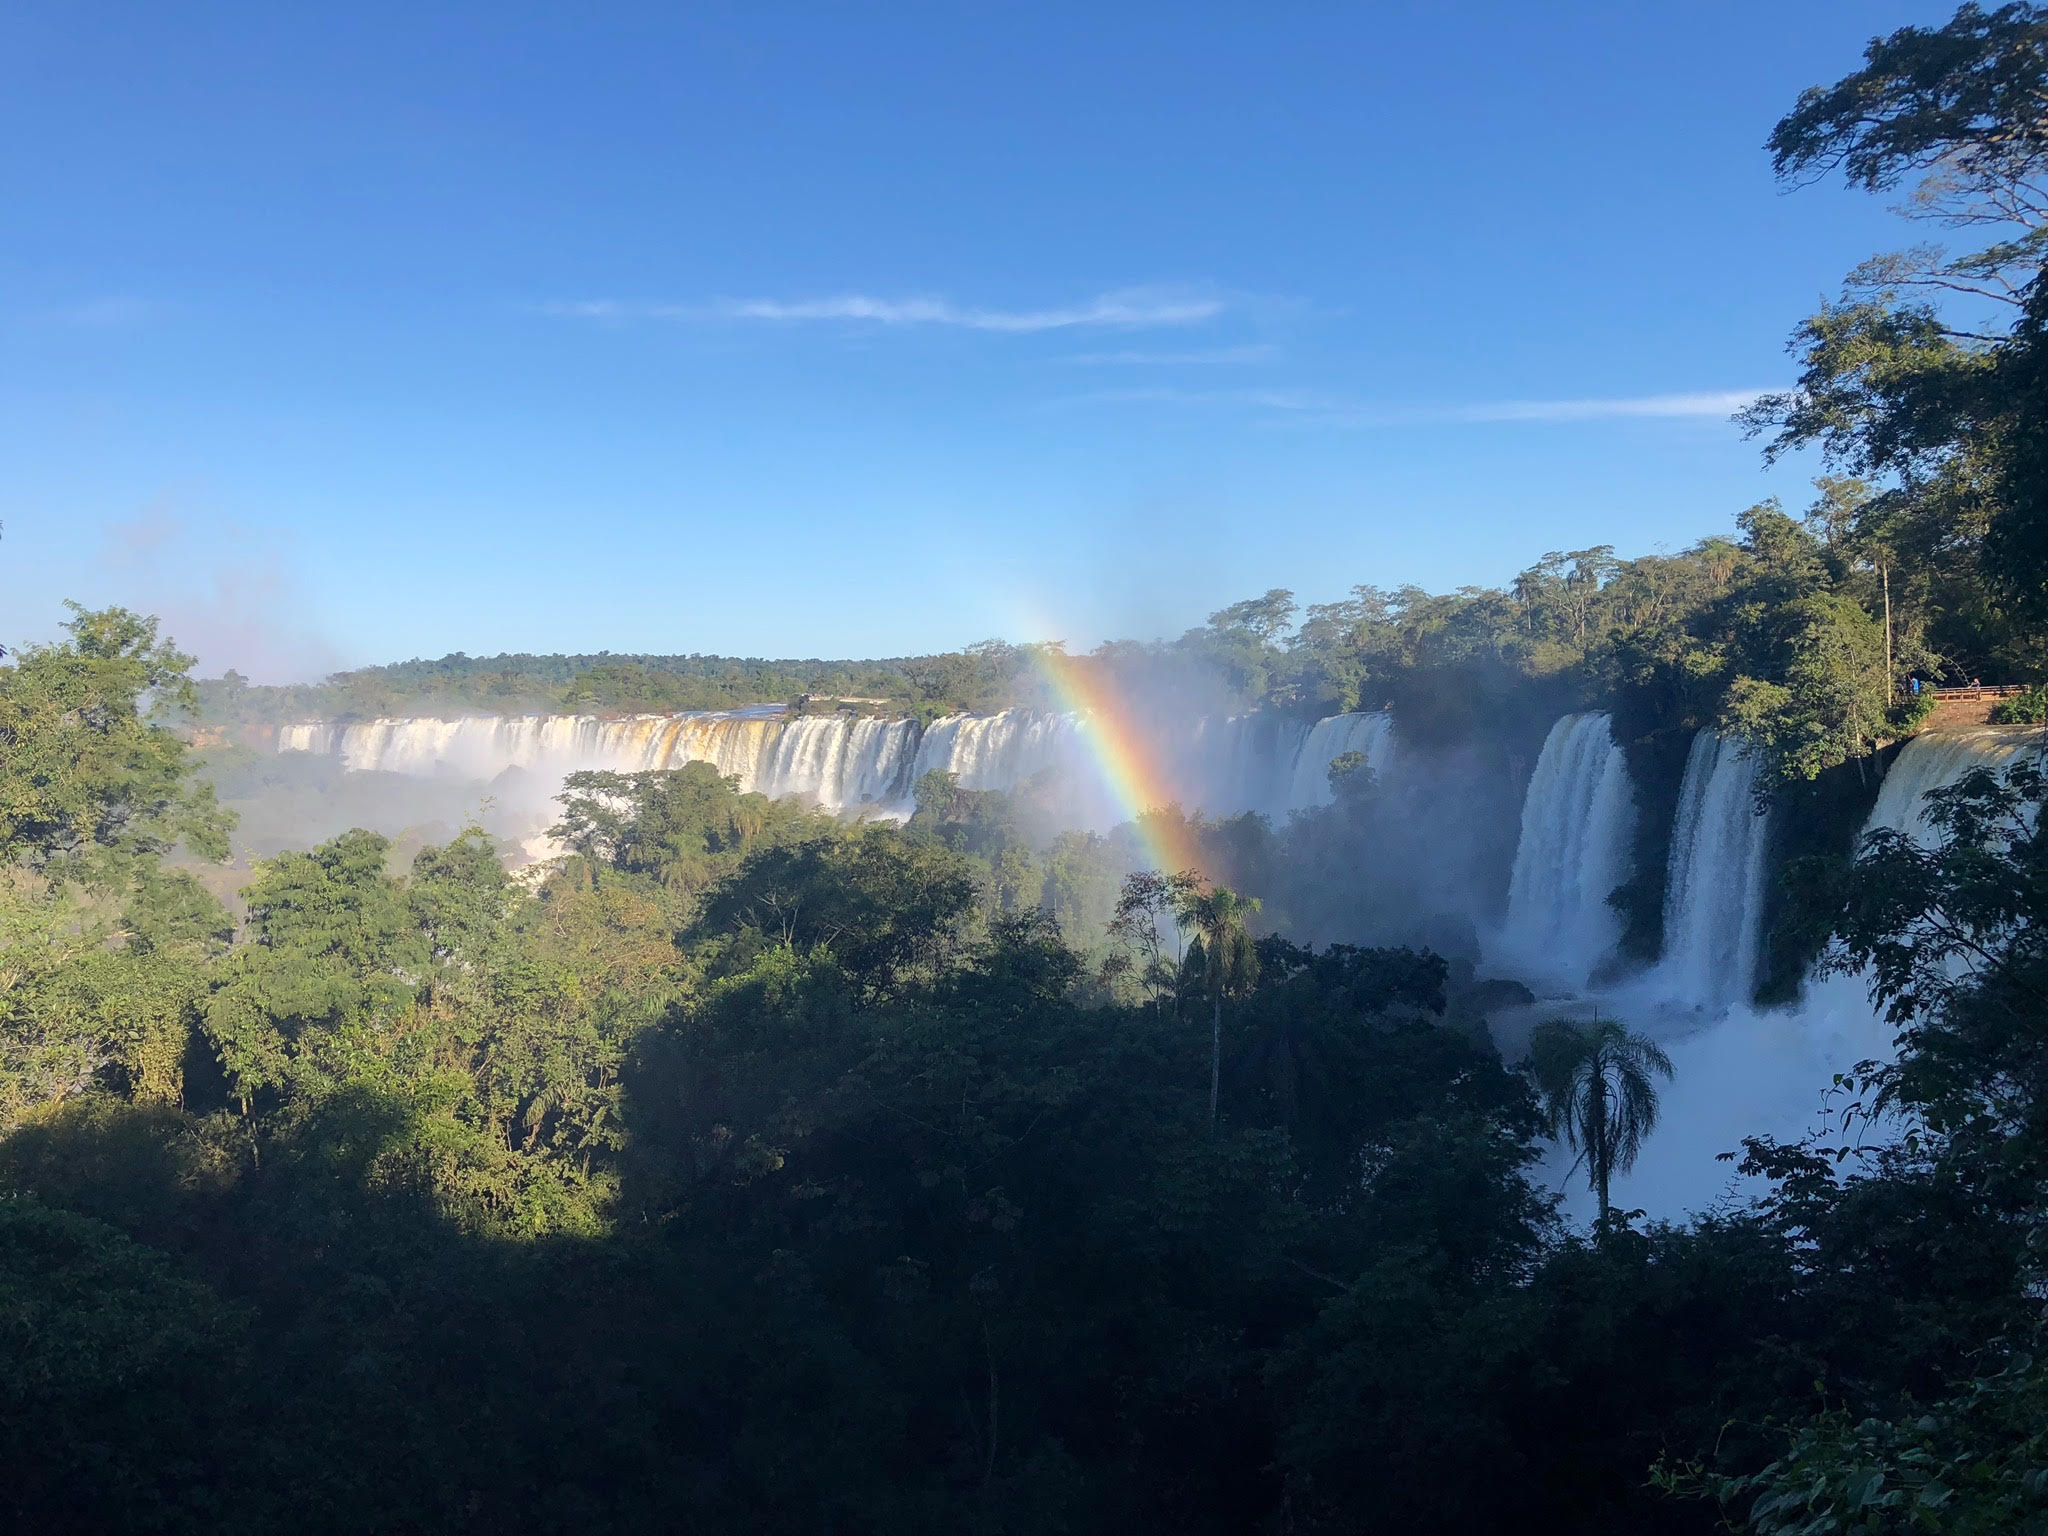 Large waterfall with a rainbow in the middle of the photo